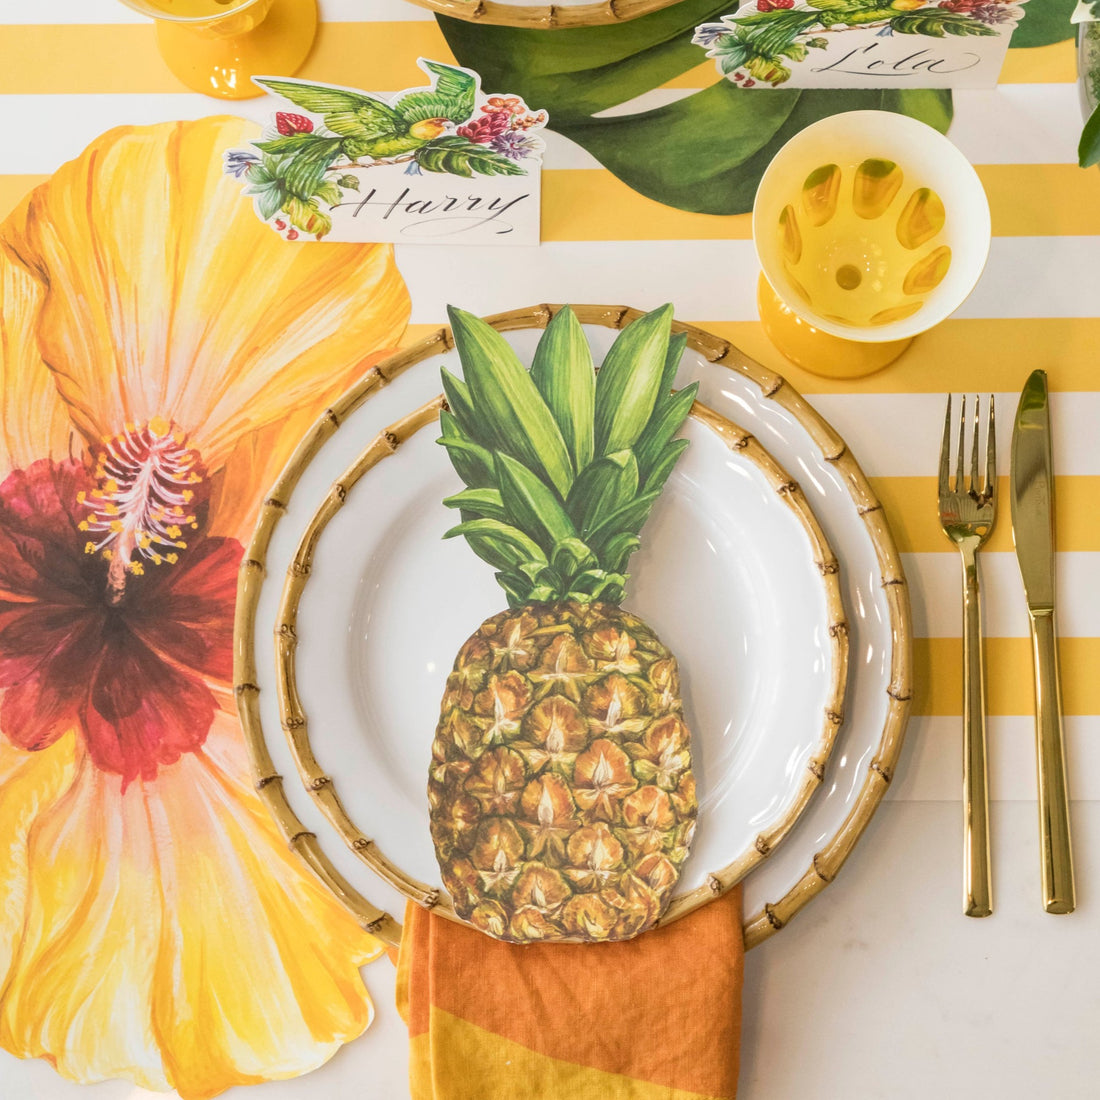 Top-down view of a vibrant tropical place setting featuring a Pineapple Table Accent resting on the plate.